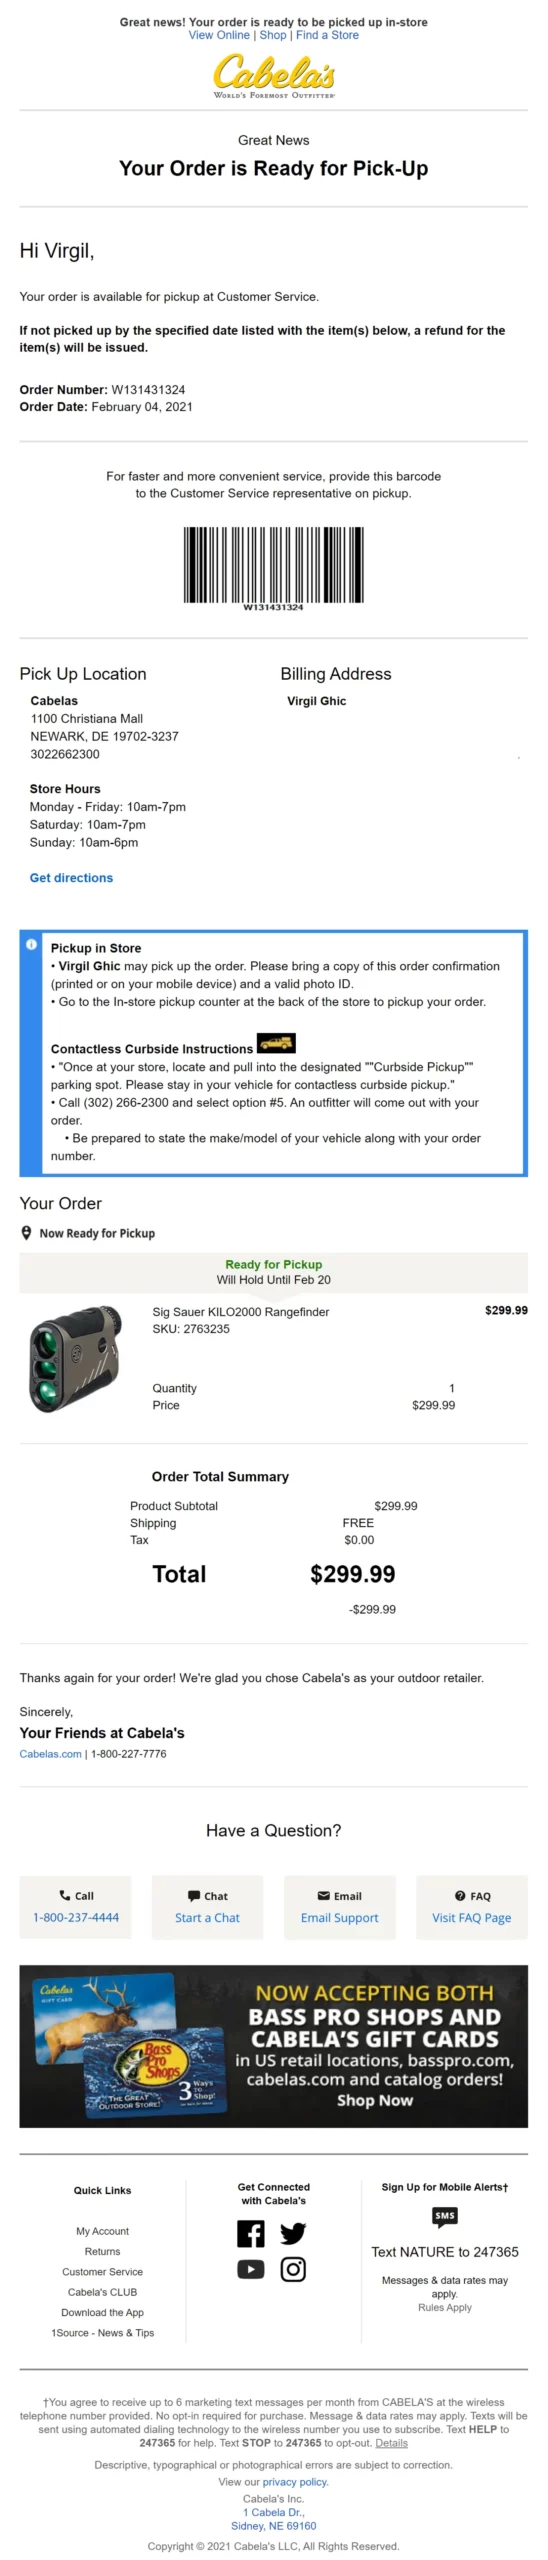 cabelas ready for pickup email